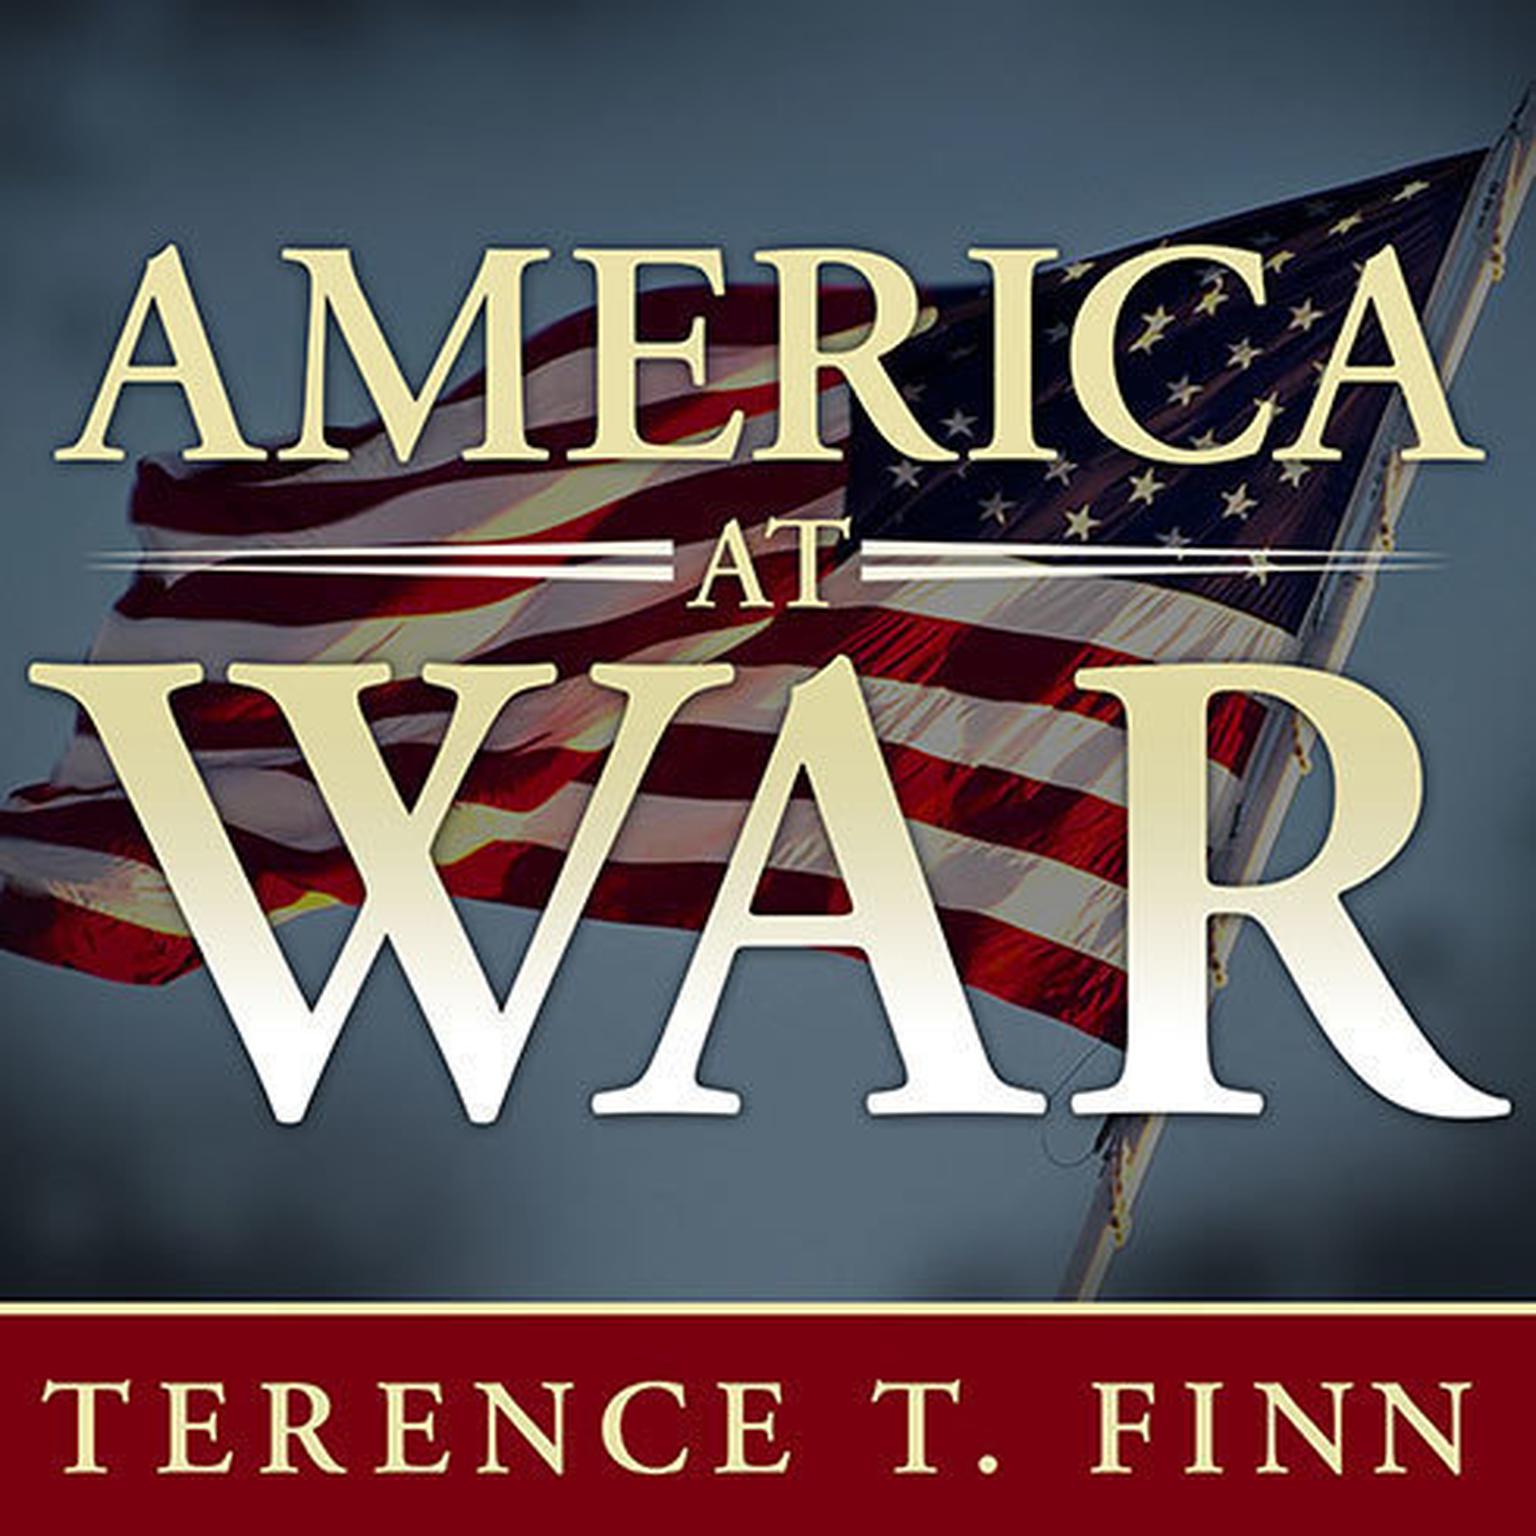 America at War: Concise Histories of U.S. Military Conflicts from Lexington to Afghanistan Audiobook, by Terence T. Finn